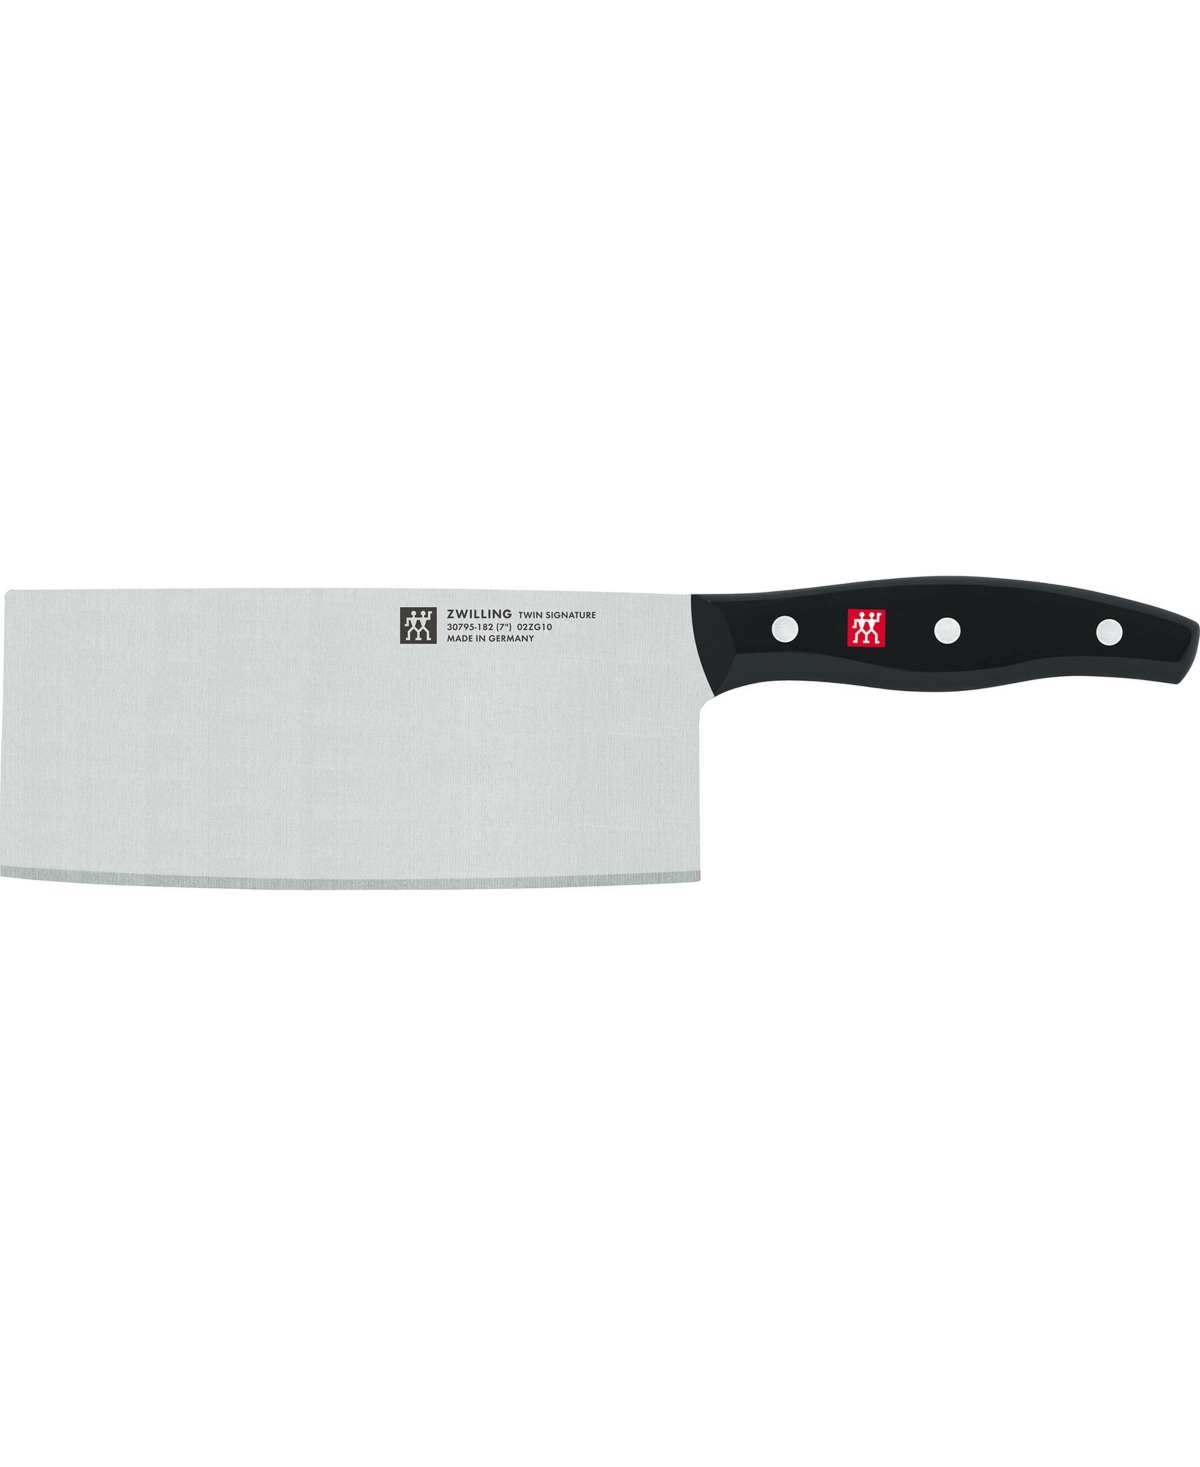 Zwilling Twin Signature 7" Chinese Chef's Knife Or Vegetable Cleaver In Black